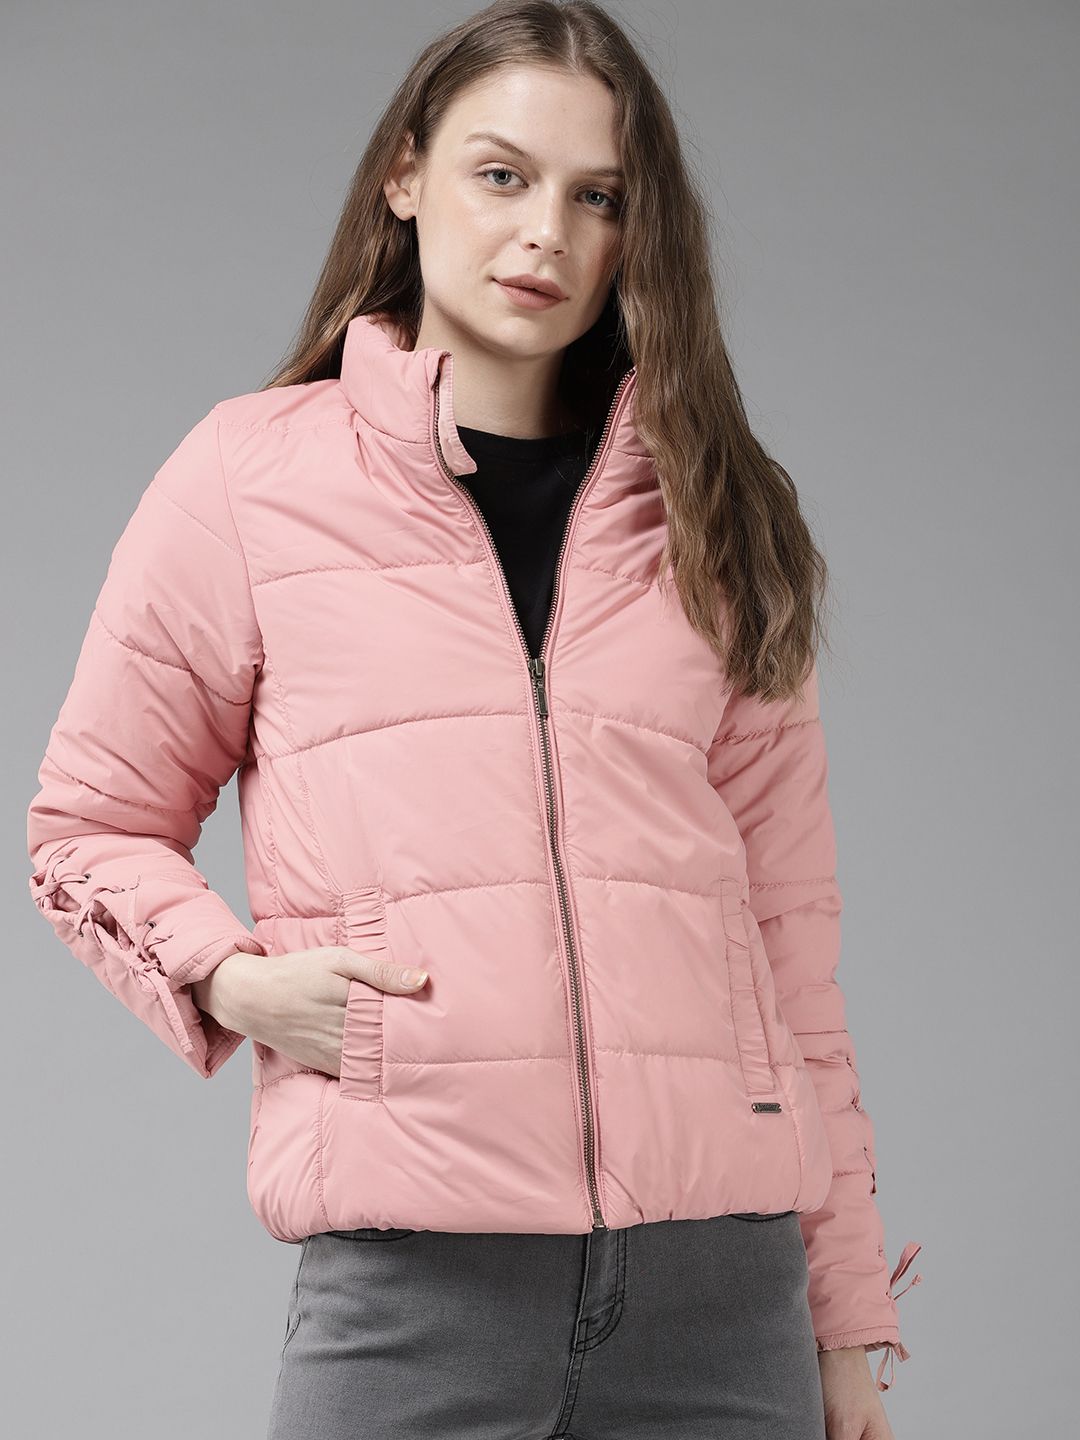 The Roadster Lifestyle Co Women Pink Solid Jacket Price in India